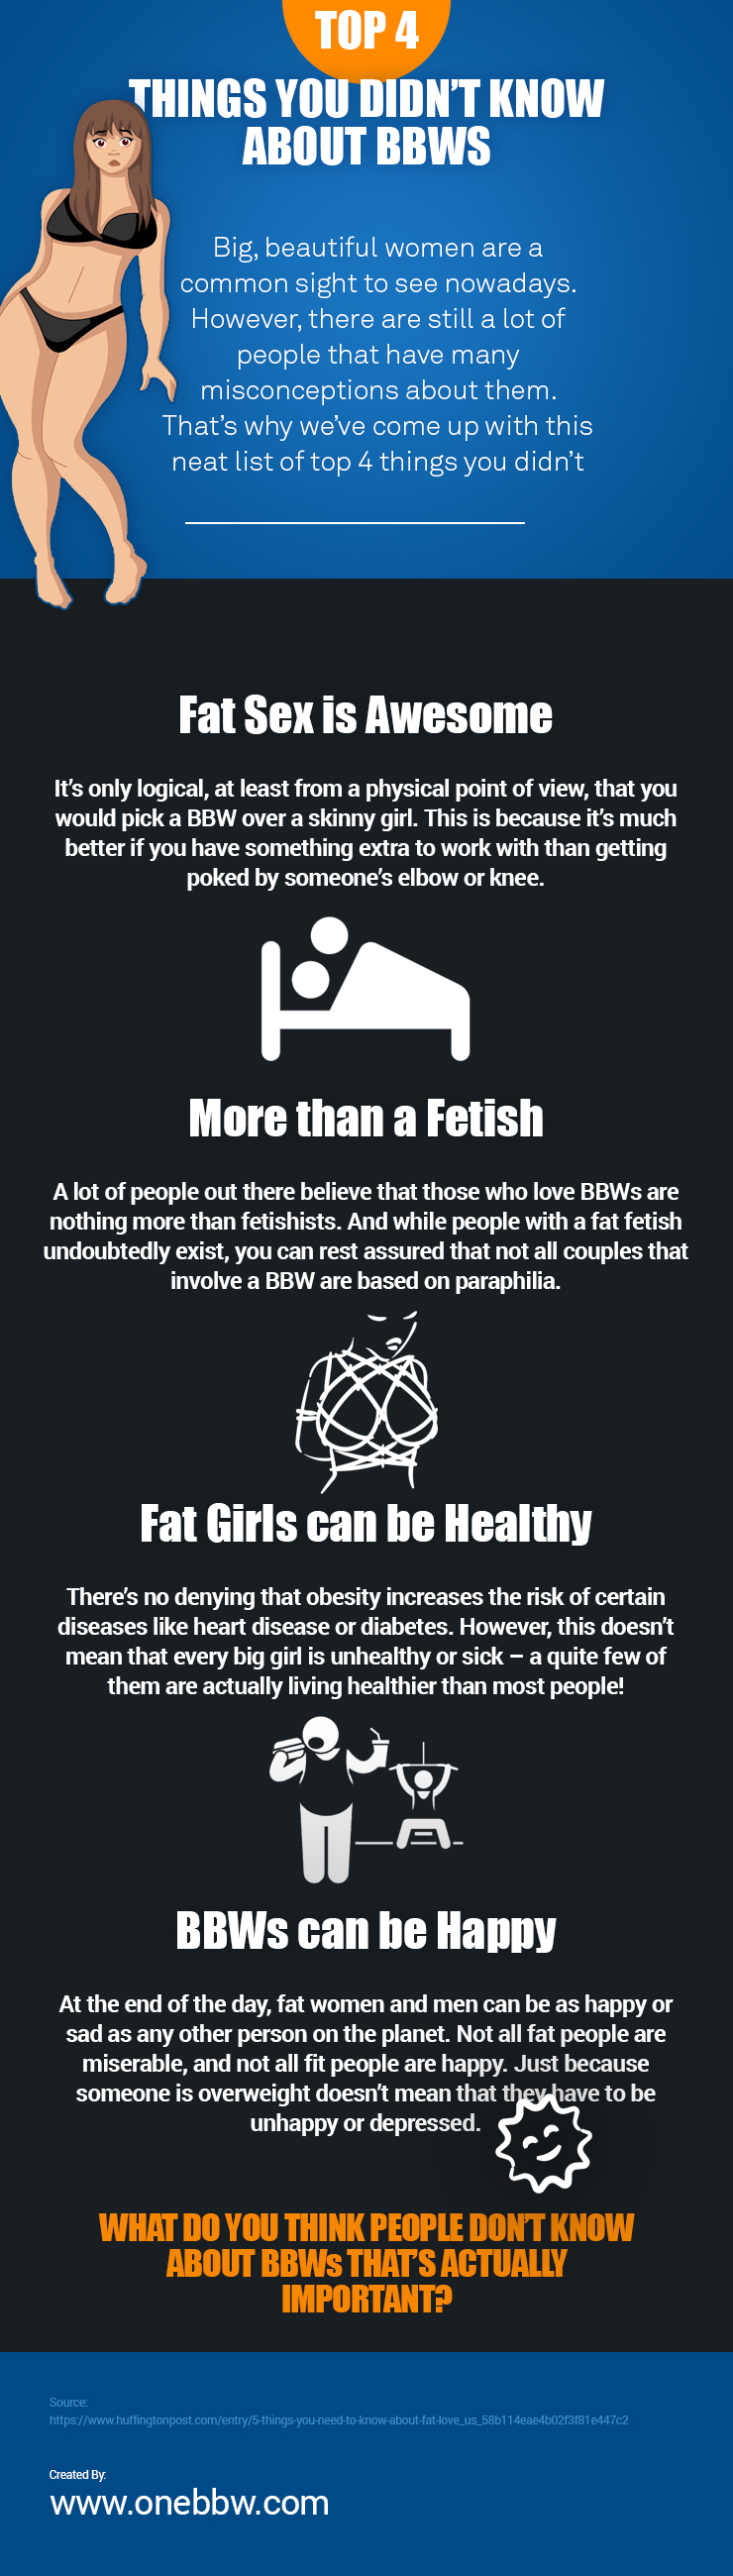 Top 4 Things You Didn’t Know about BBWs